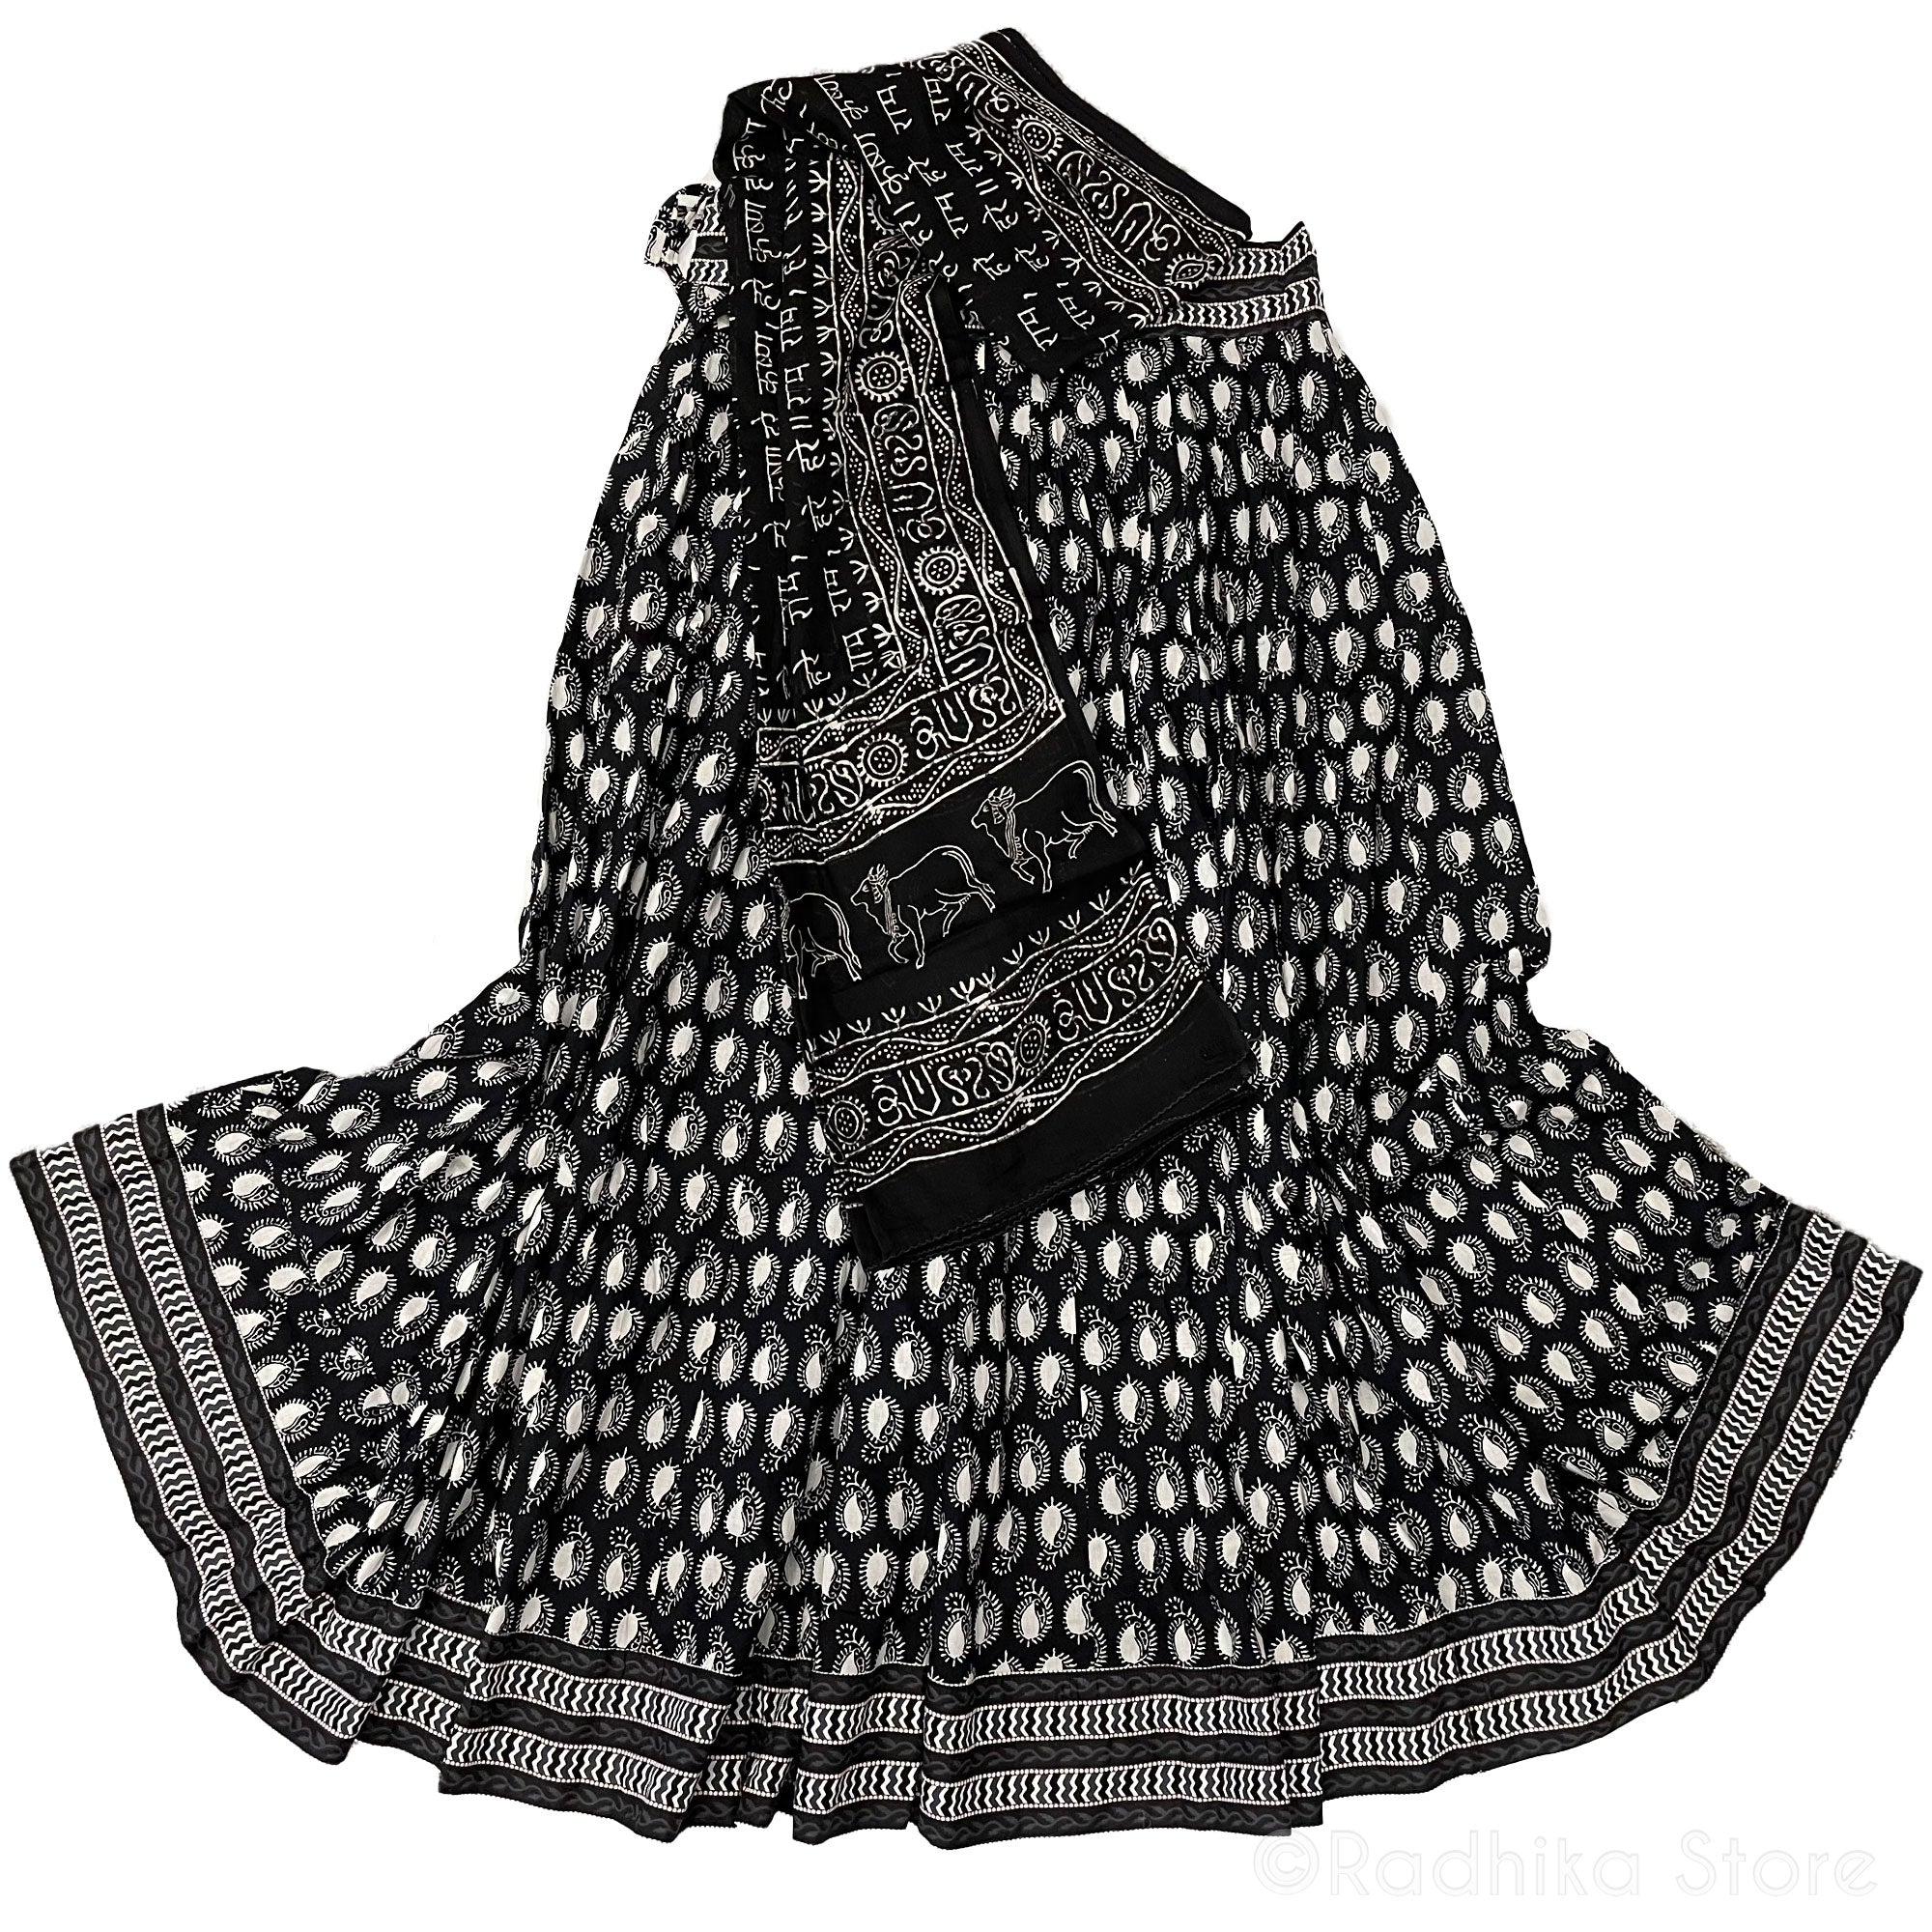 Black With White Chandrikas - Gopi Skirt - Cotton Screen Print Fabric - With Mantra Chadar